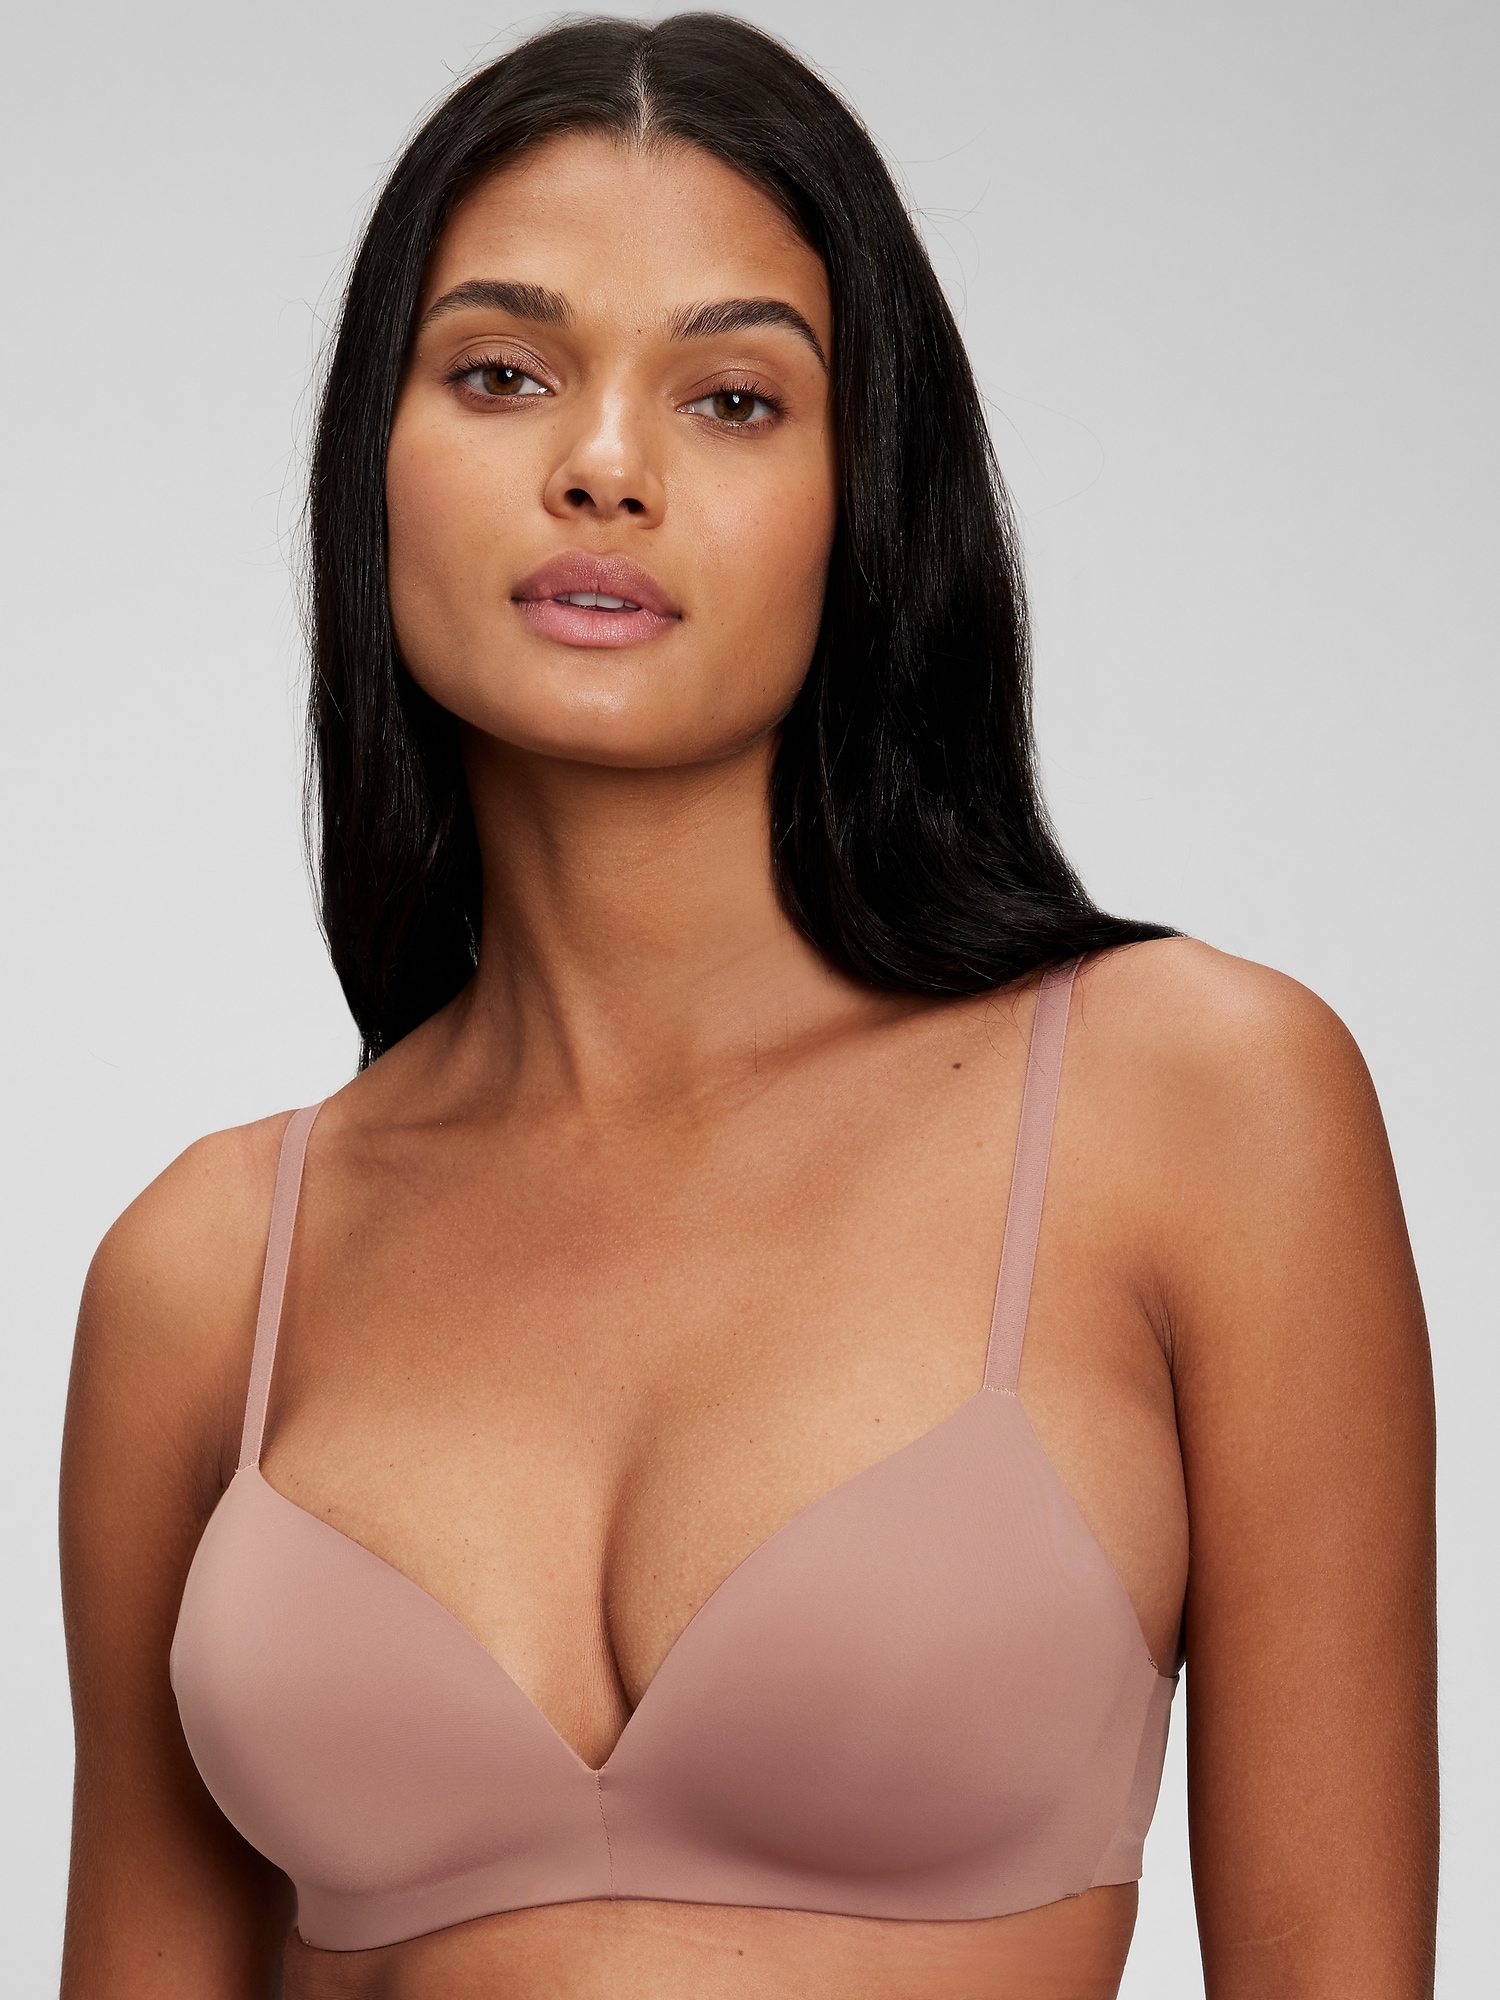 Evestacy Brand Smooth Non-Wired Padded T-shirt Bra